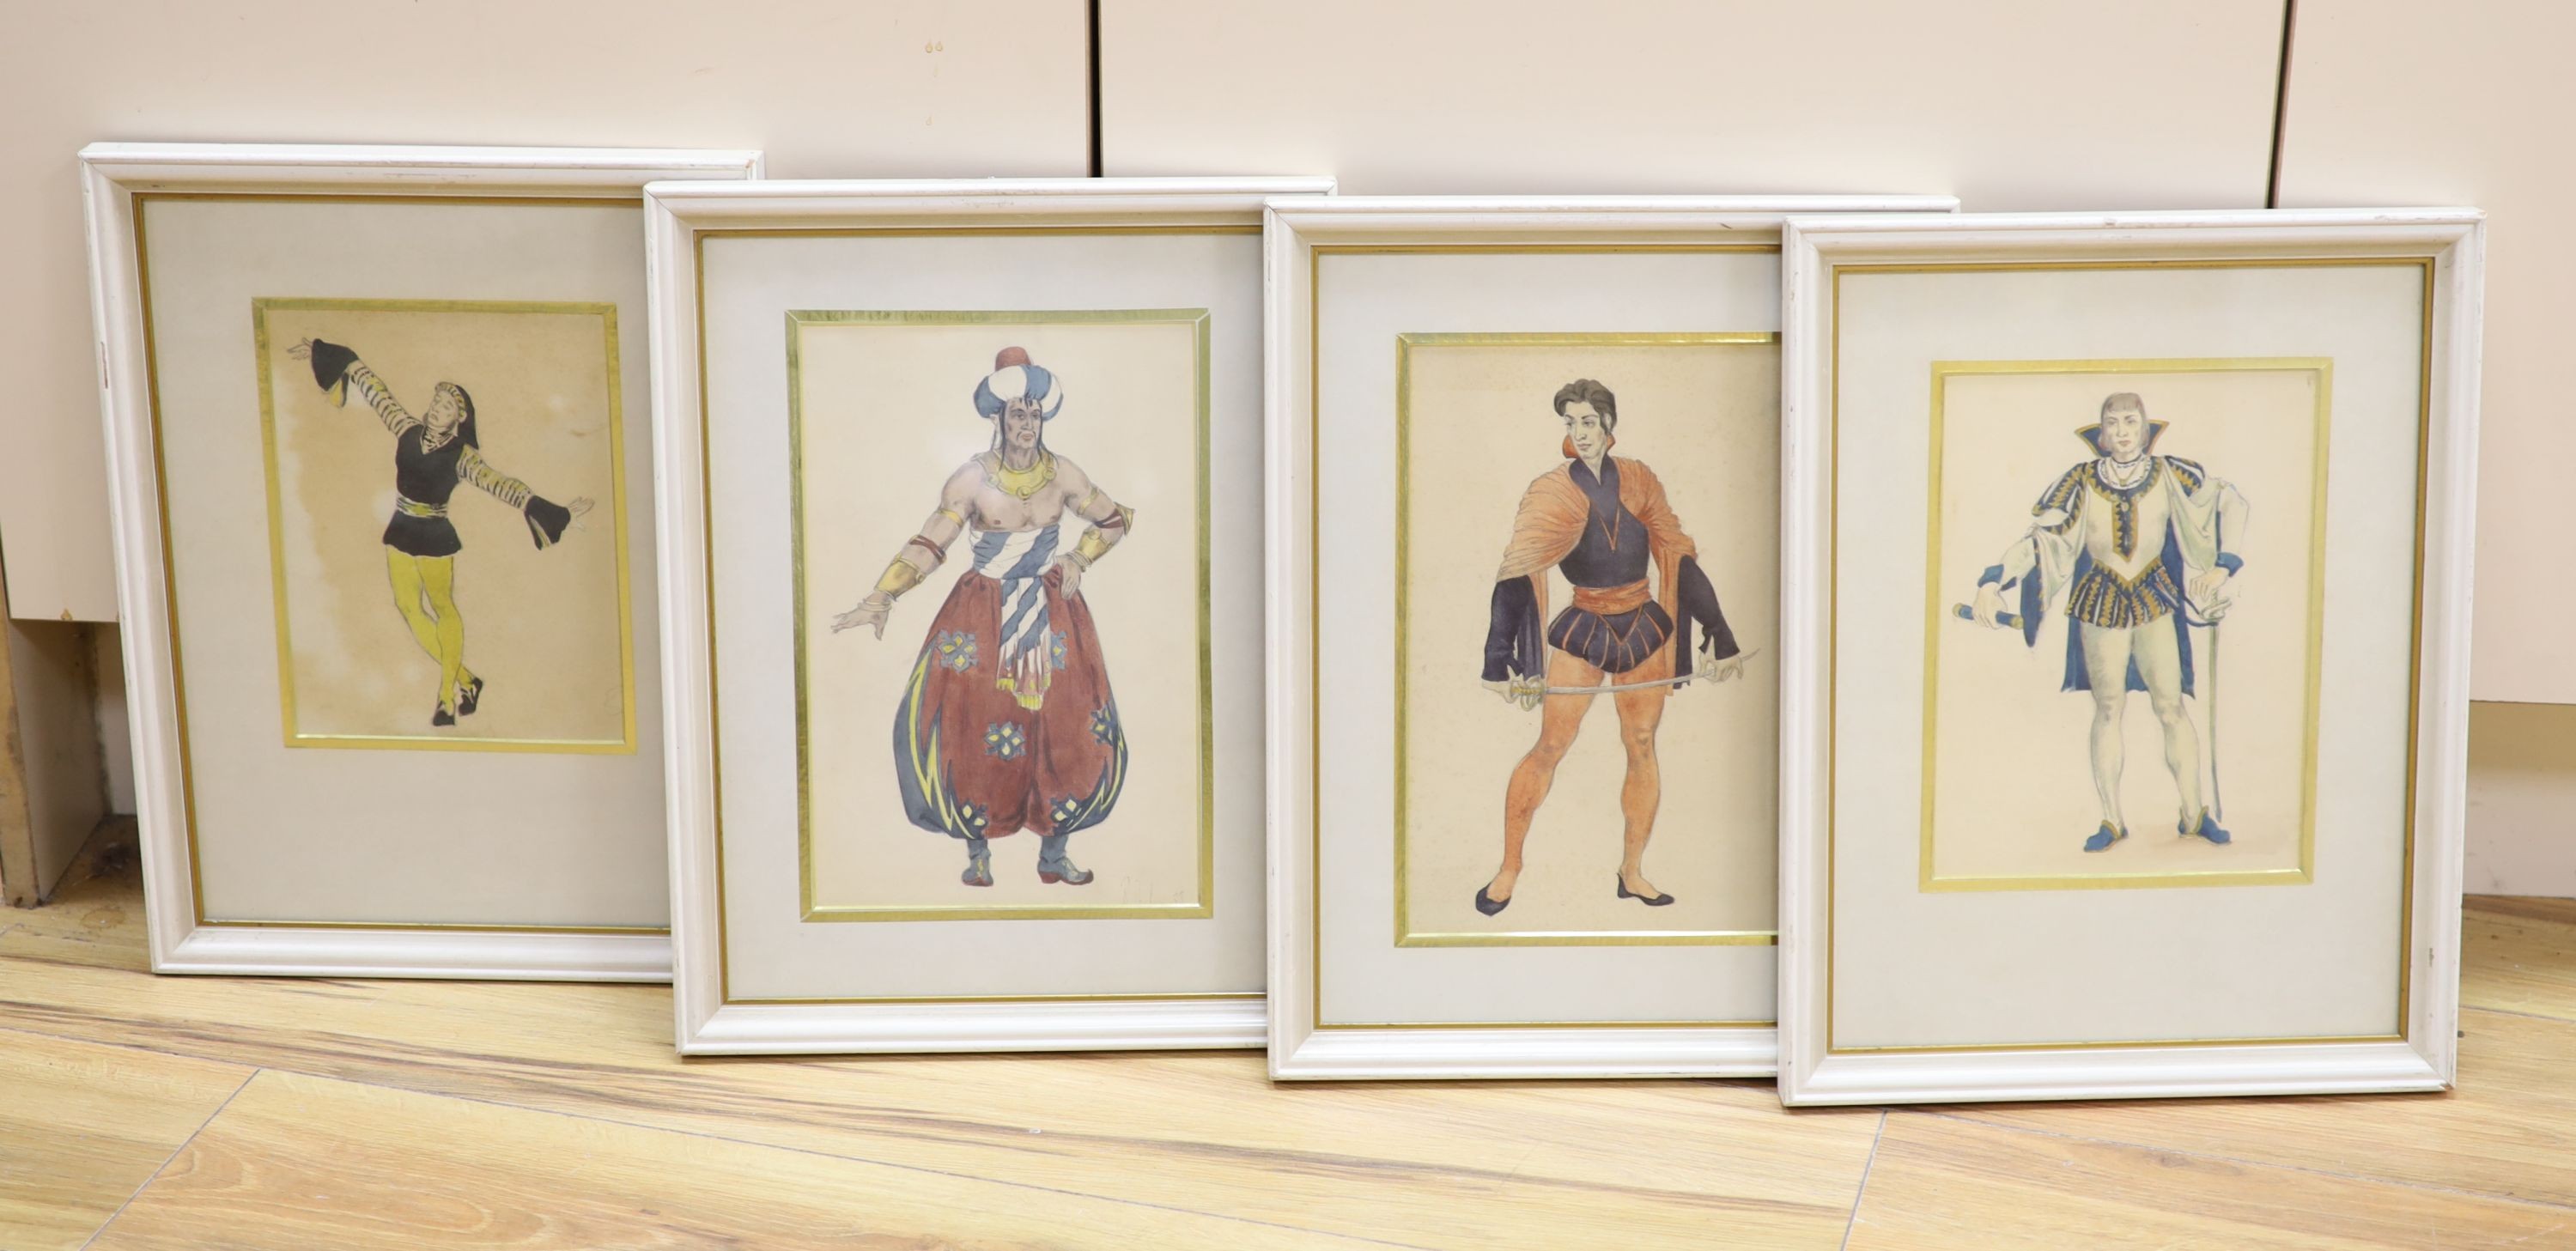 Four opera or theatre costume designs, pencil and watercolour, one indistinctly signed and dated ‘33’, largest 26 x 16.5 cm